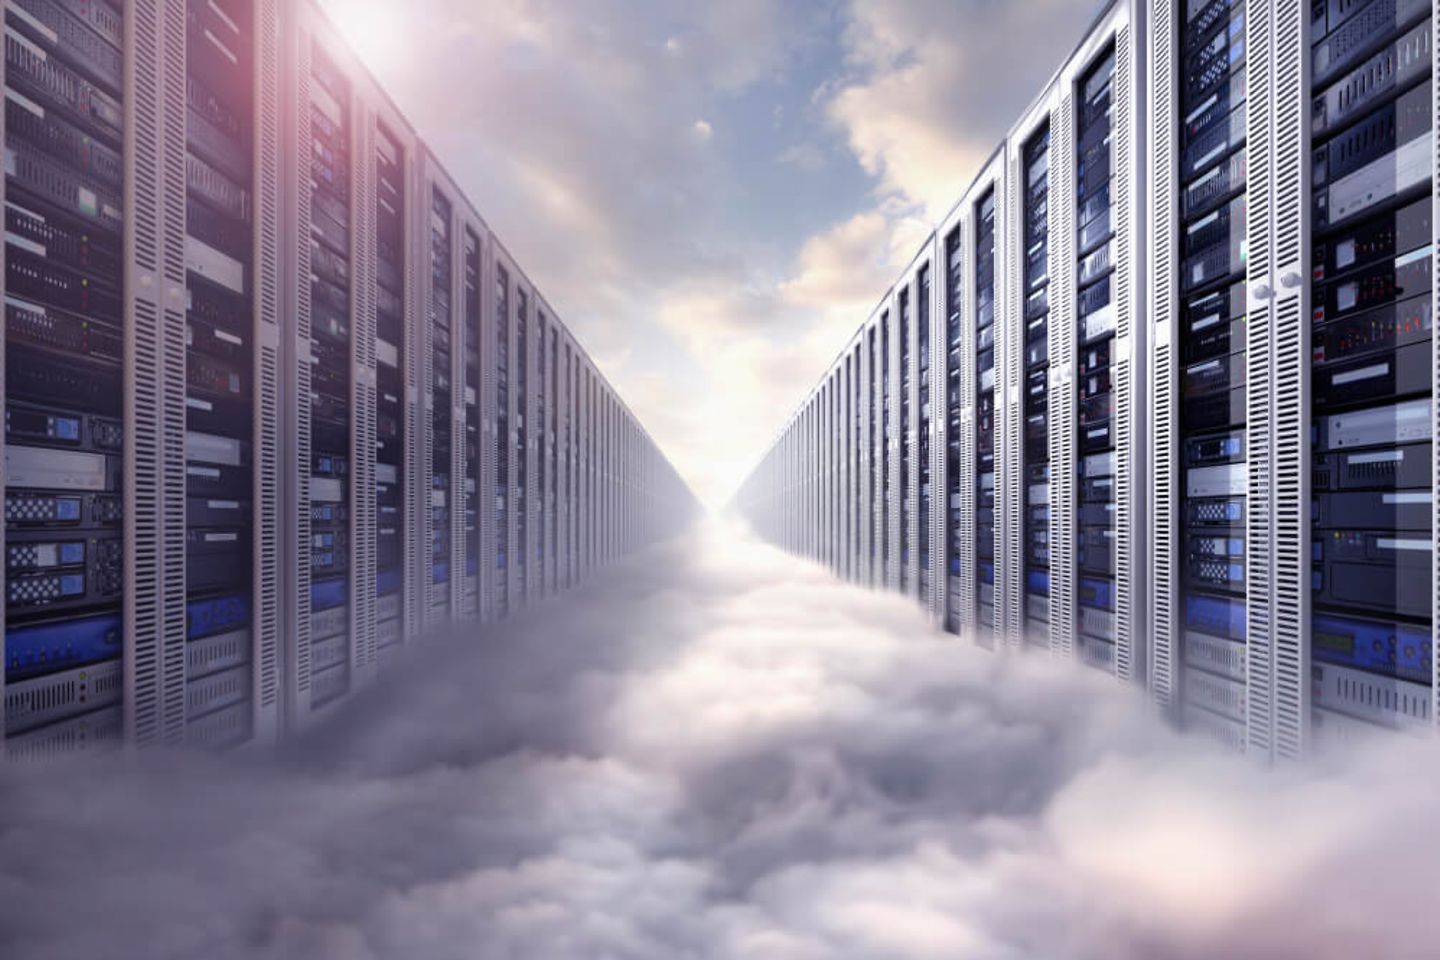 Composite image of computer servers and clouds